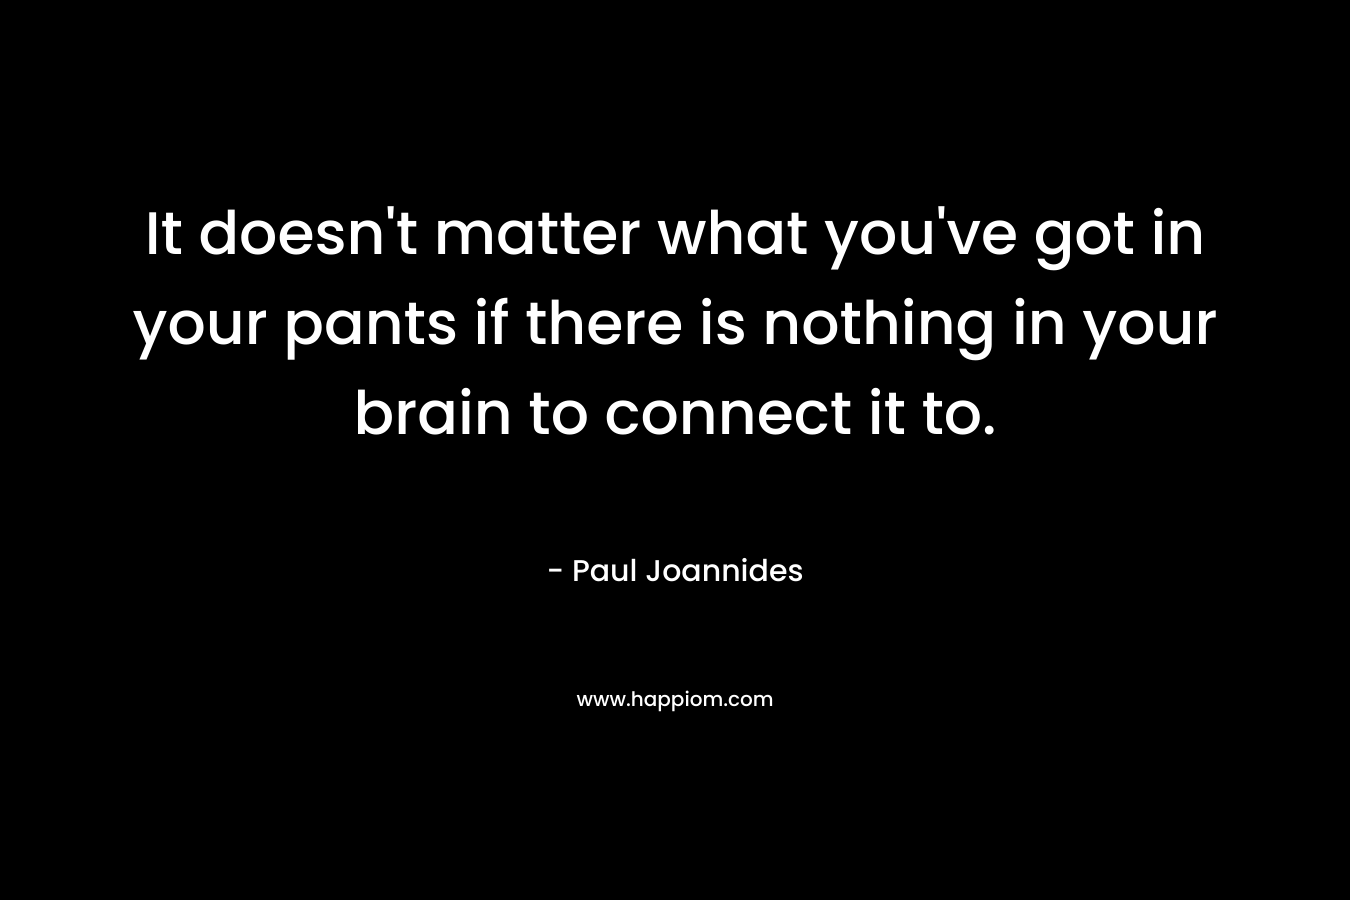 It doesn’t matter what you’ve got in your pants if there is nothing in your brain to connect it to. – Paul Joannides